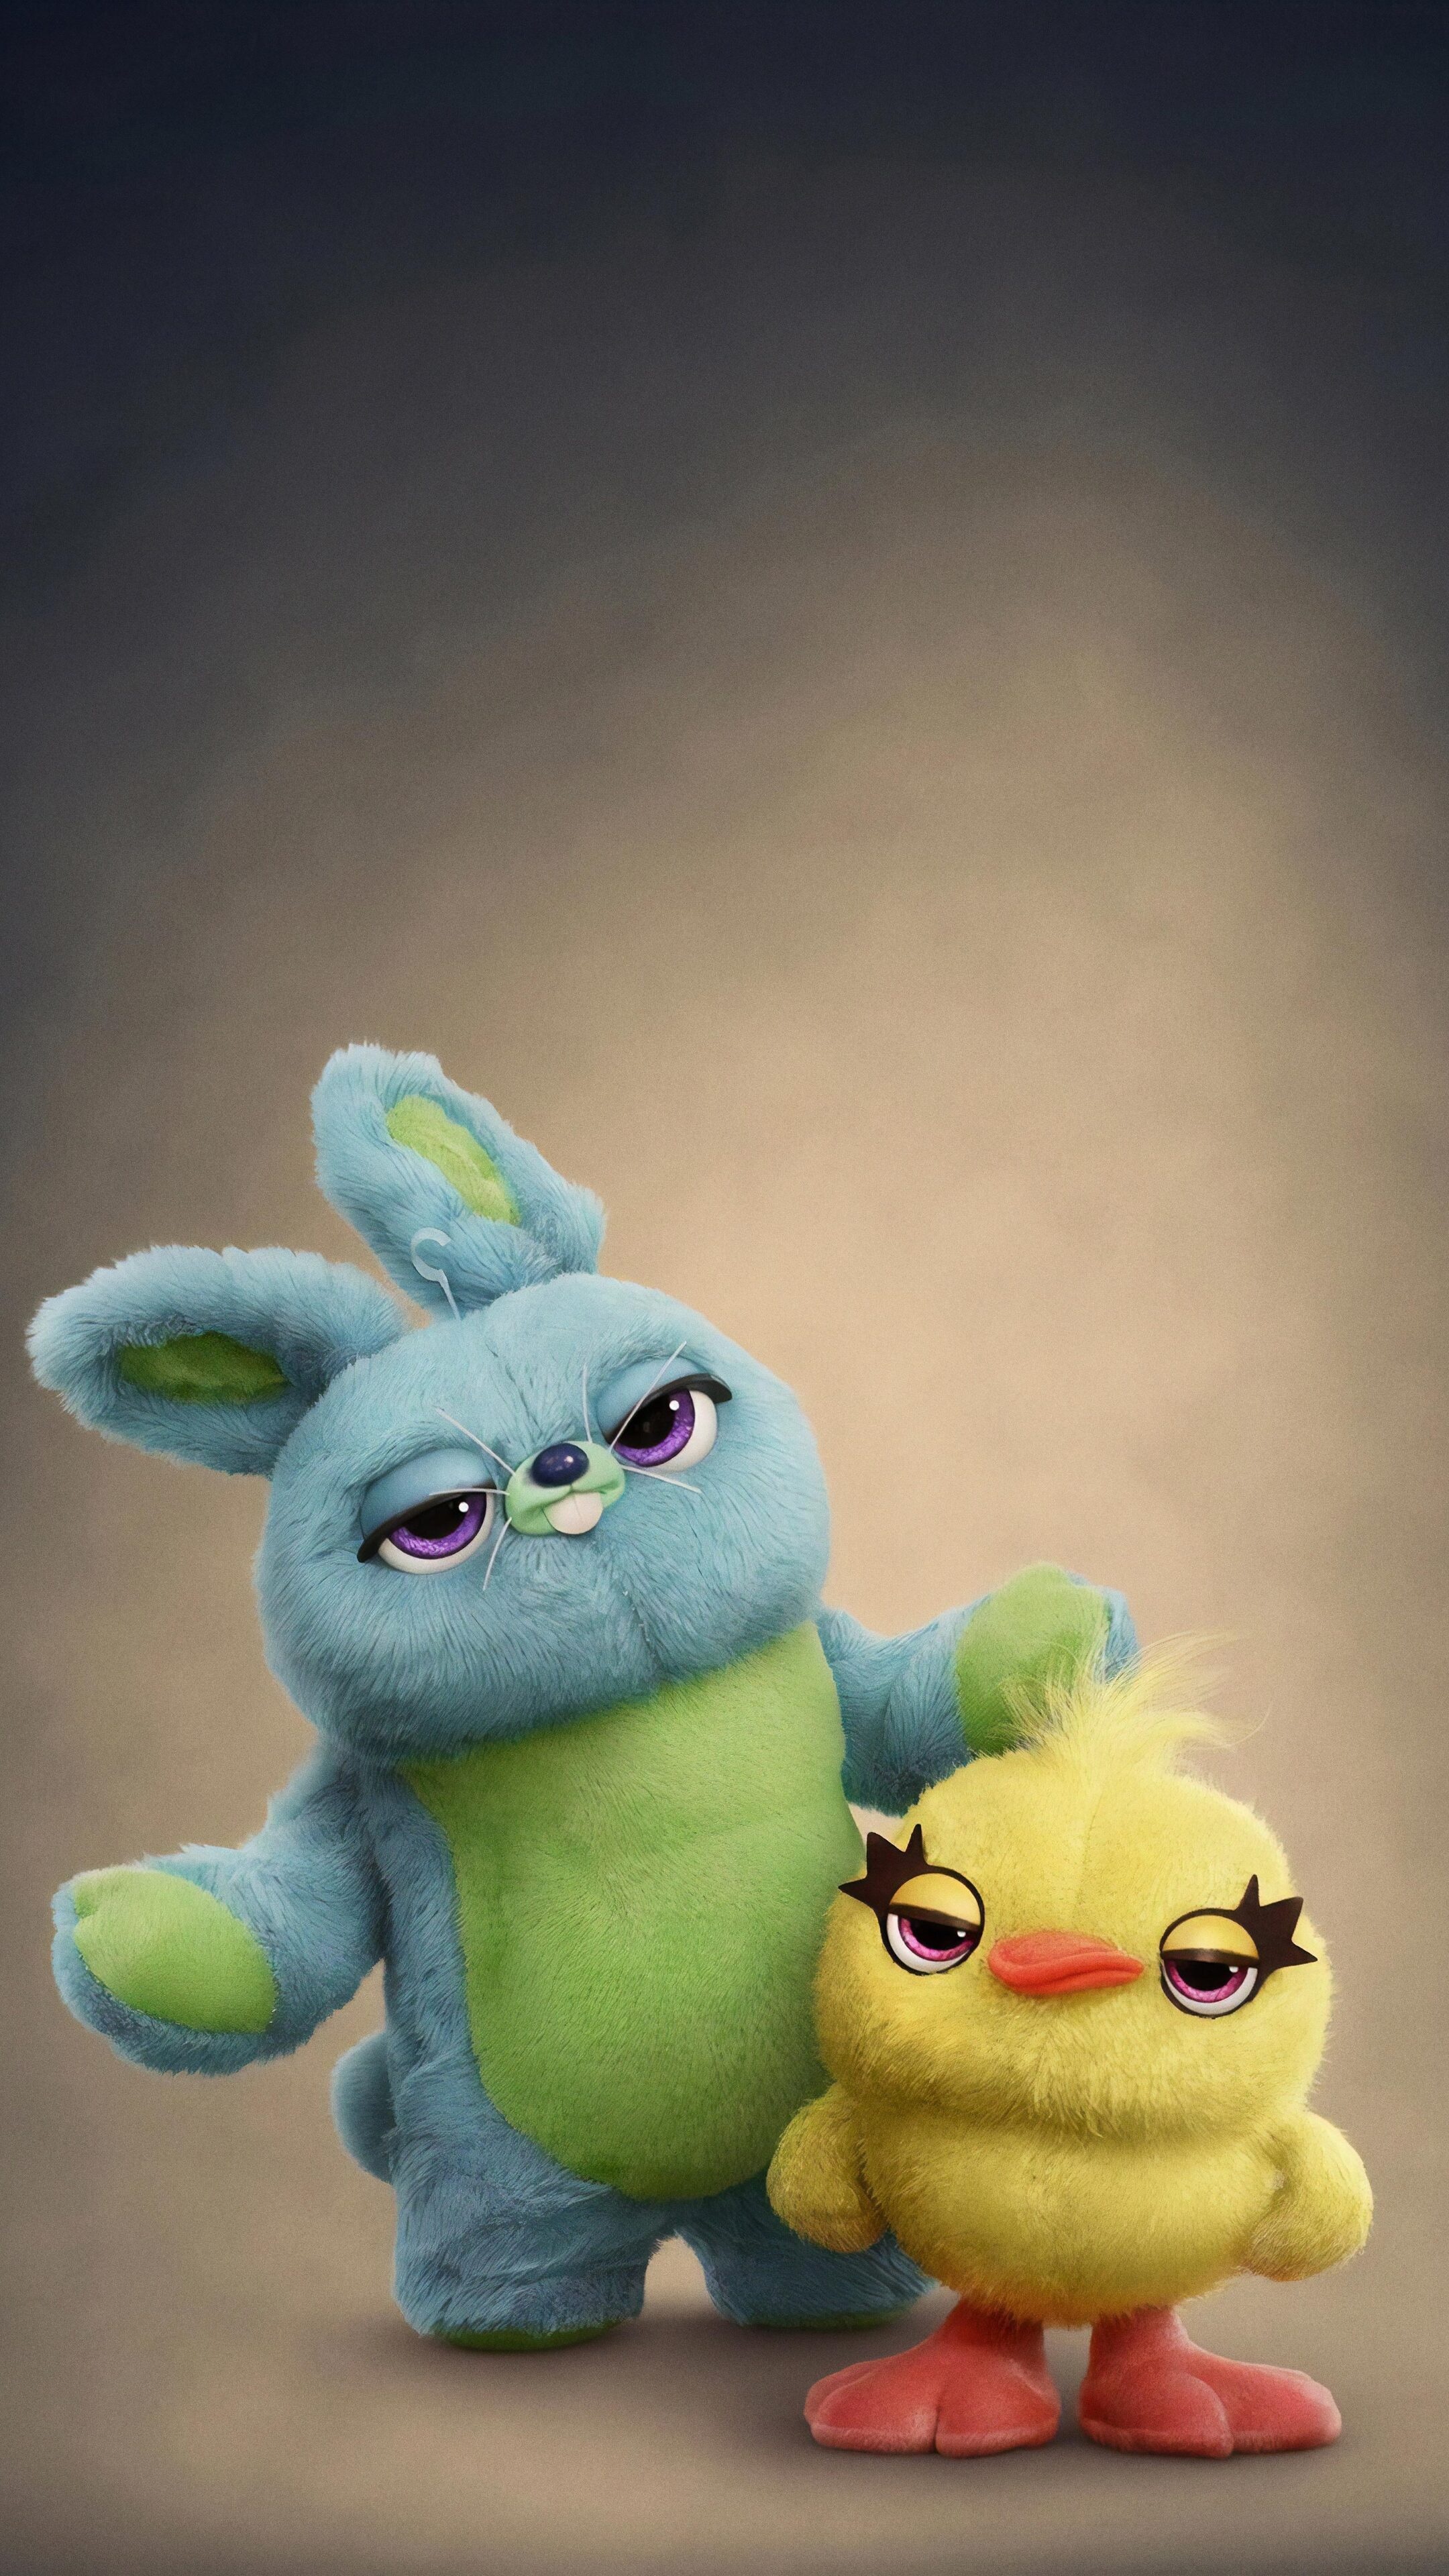 Toy Story 4, Animated film, Heartwarming tale, Beloved characters, 2160x3840 4K Handy